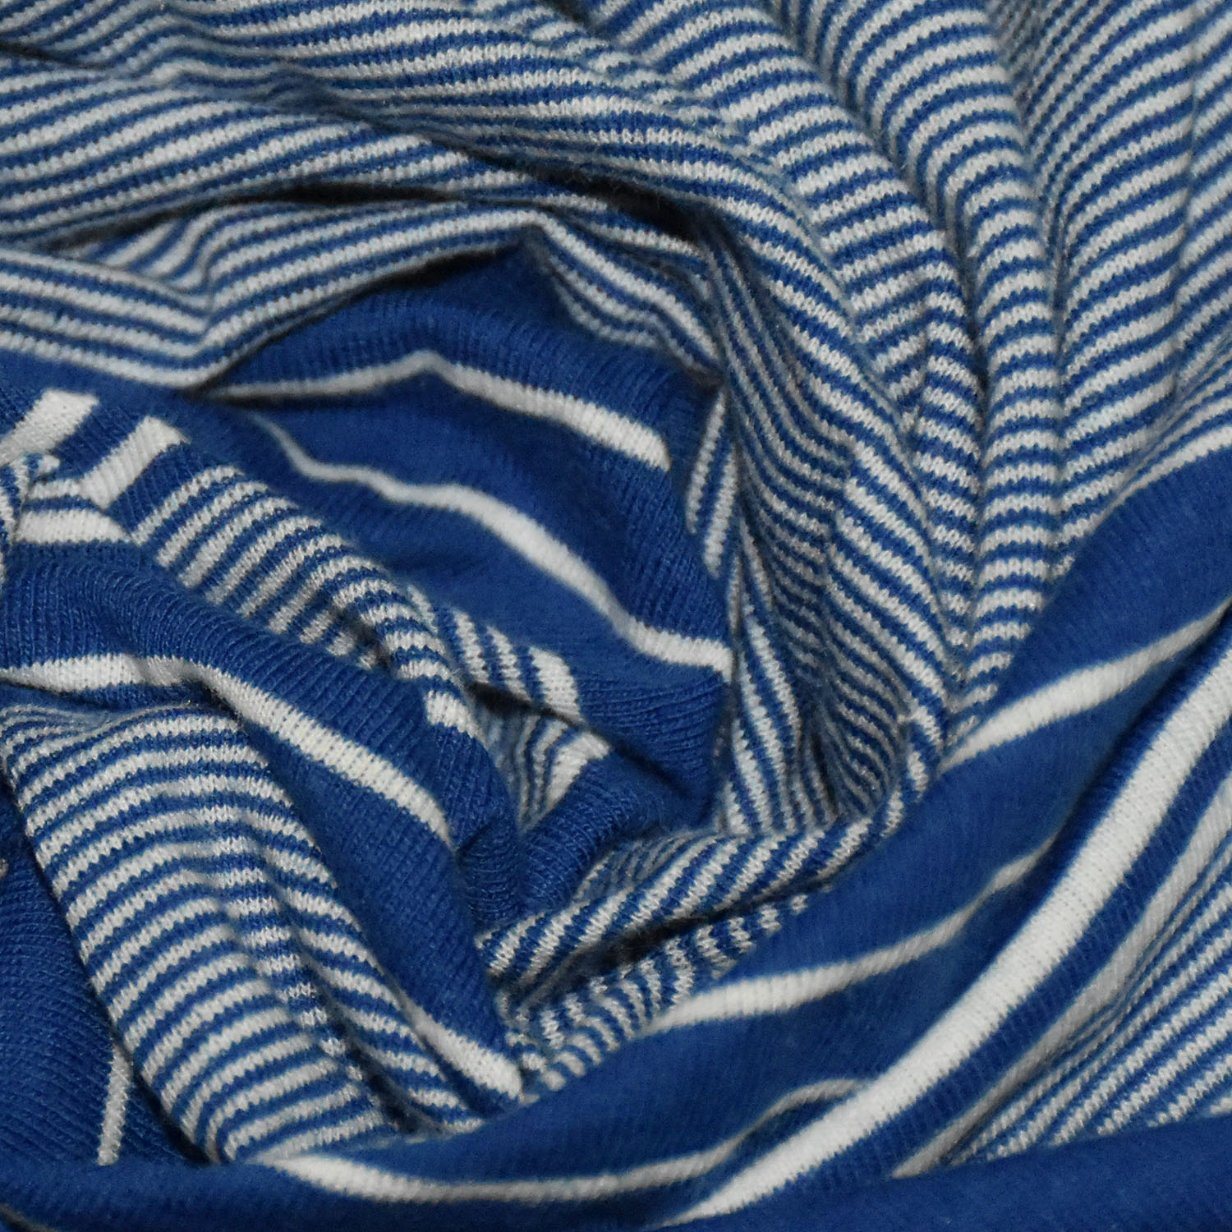 Cotton/Linen Stripe Jersey for Clothing